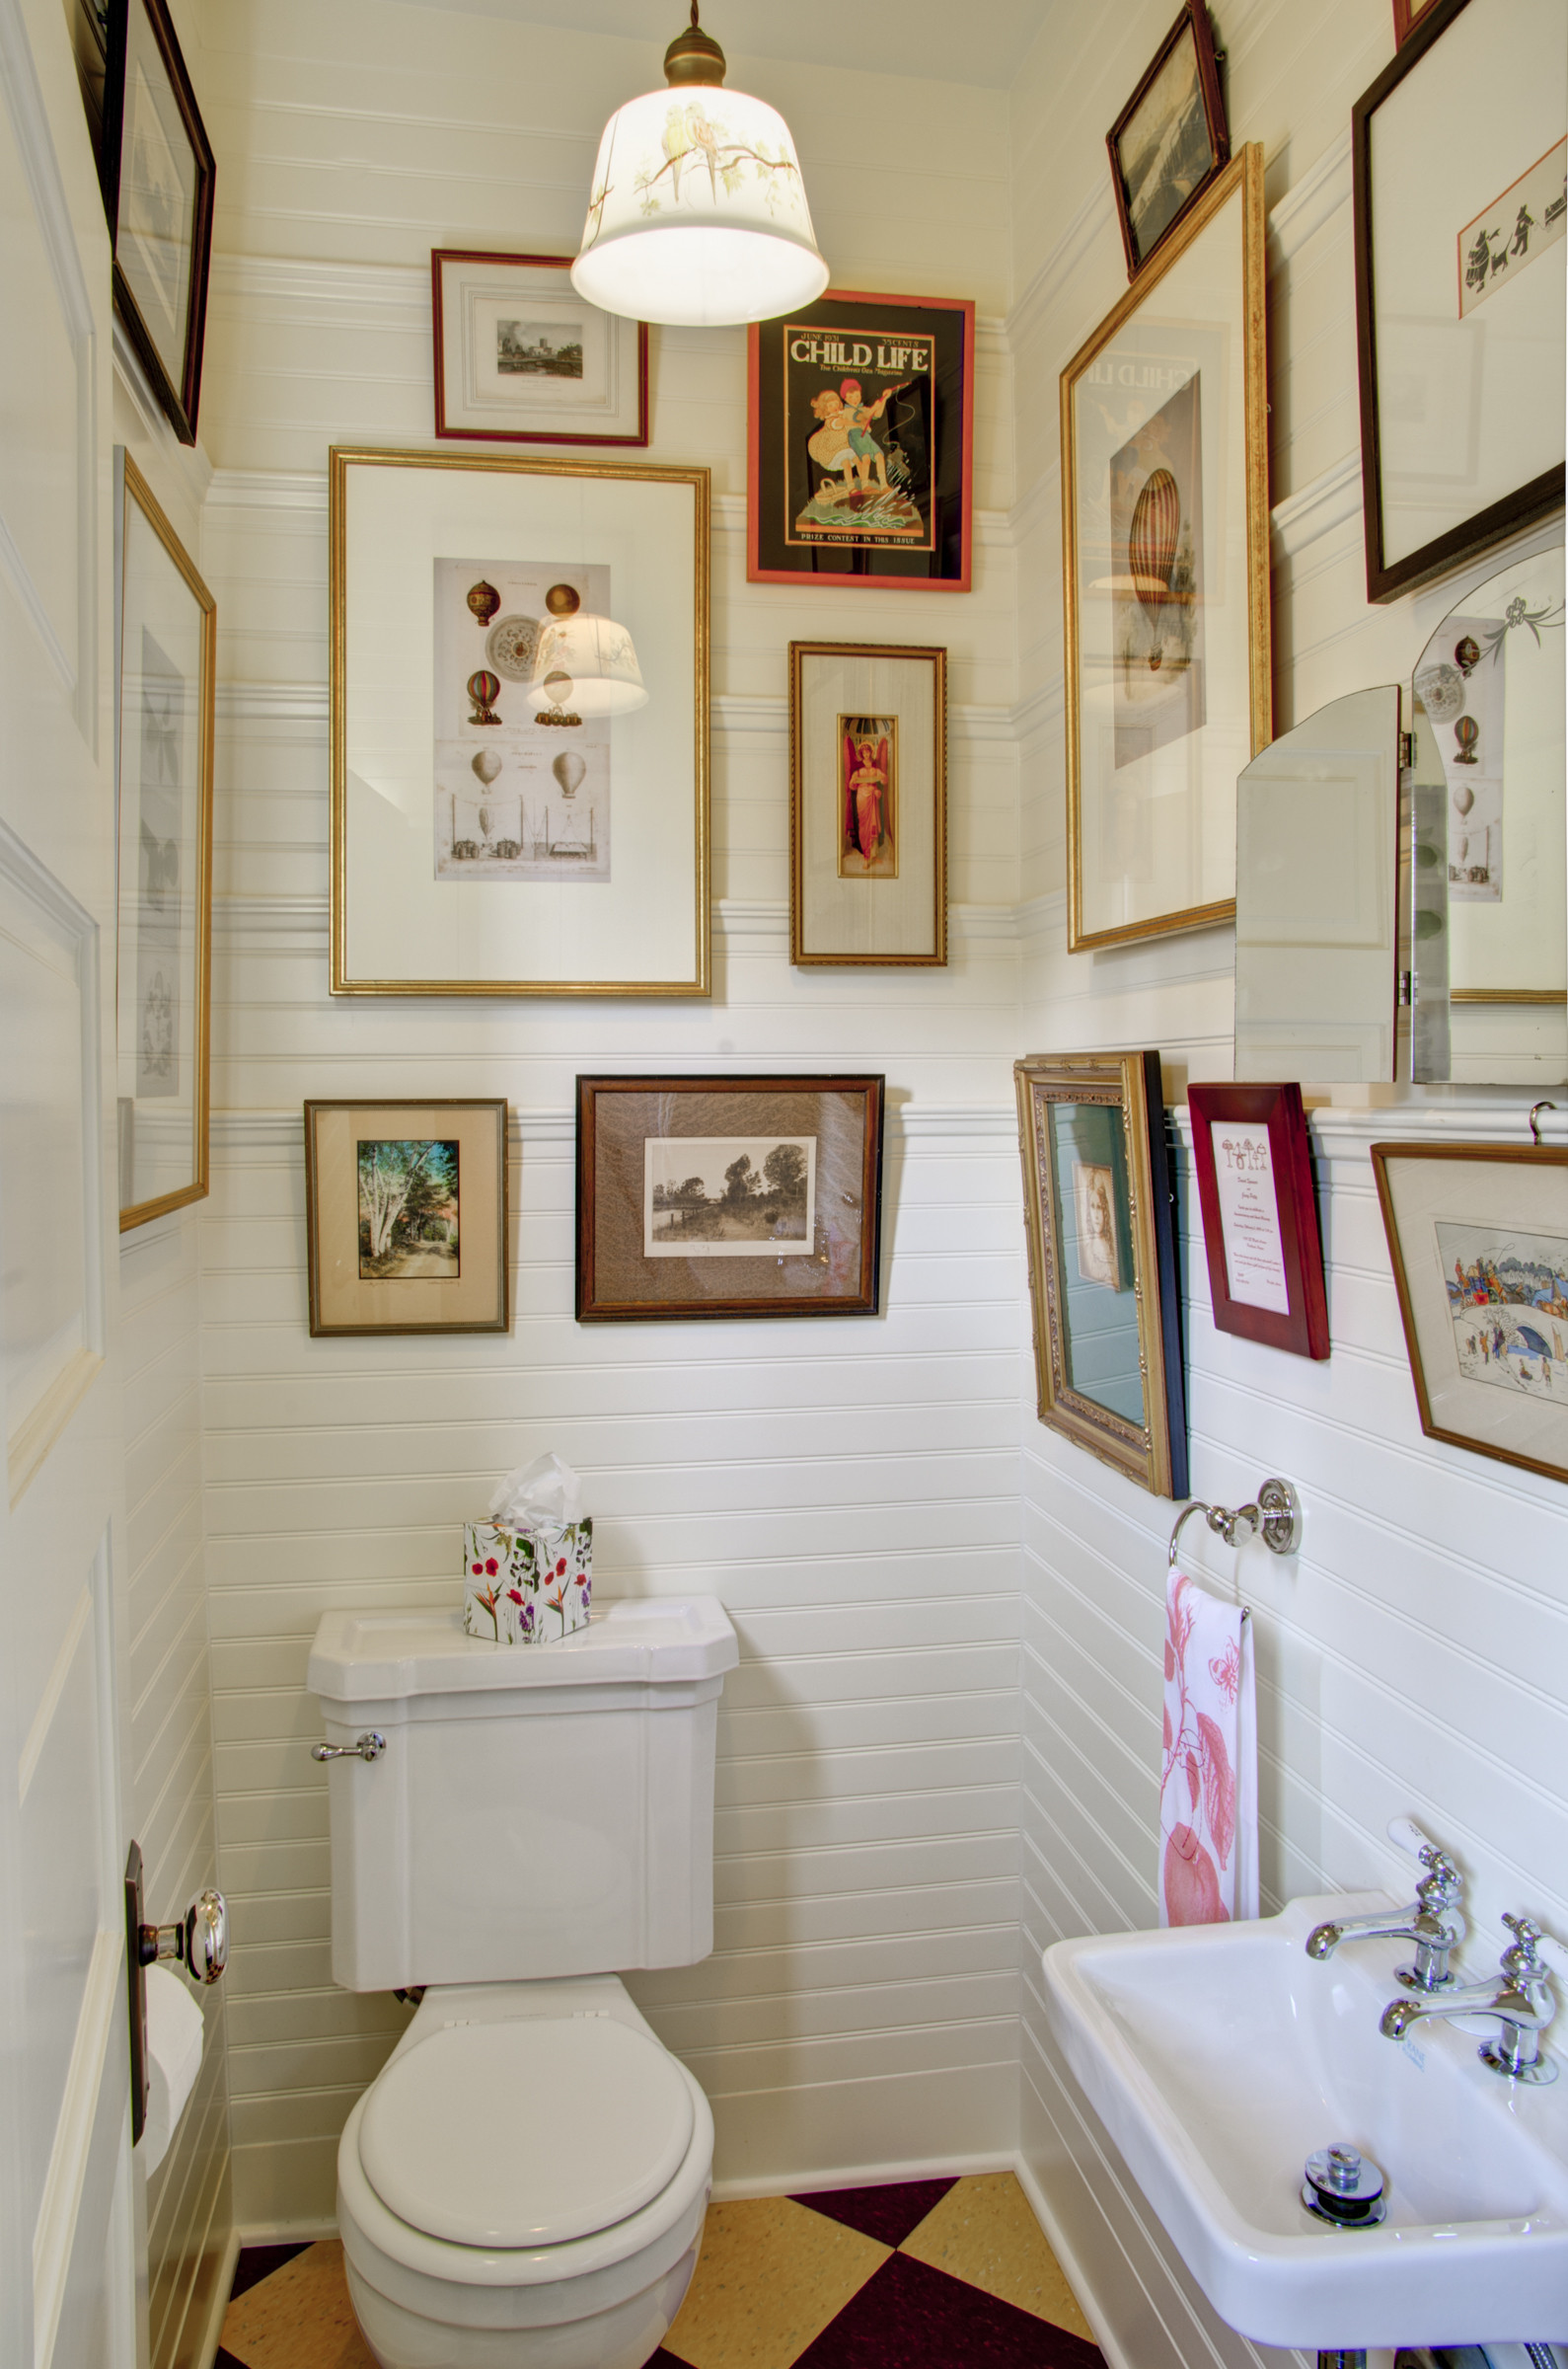 Bathroom Wall Hangings
 Wall Decorating Ideas from Portland Seattle Home Builder